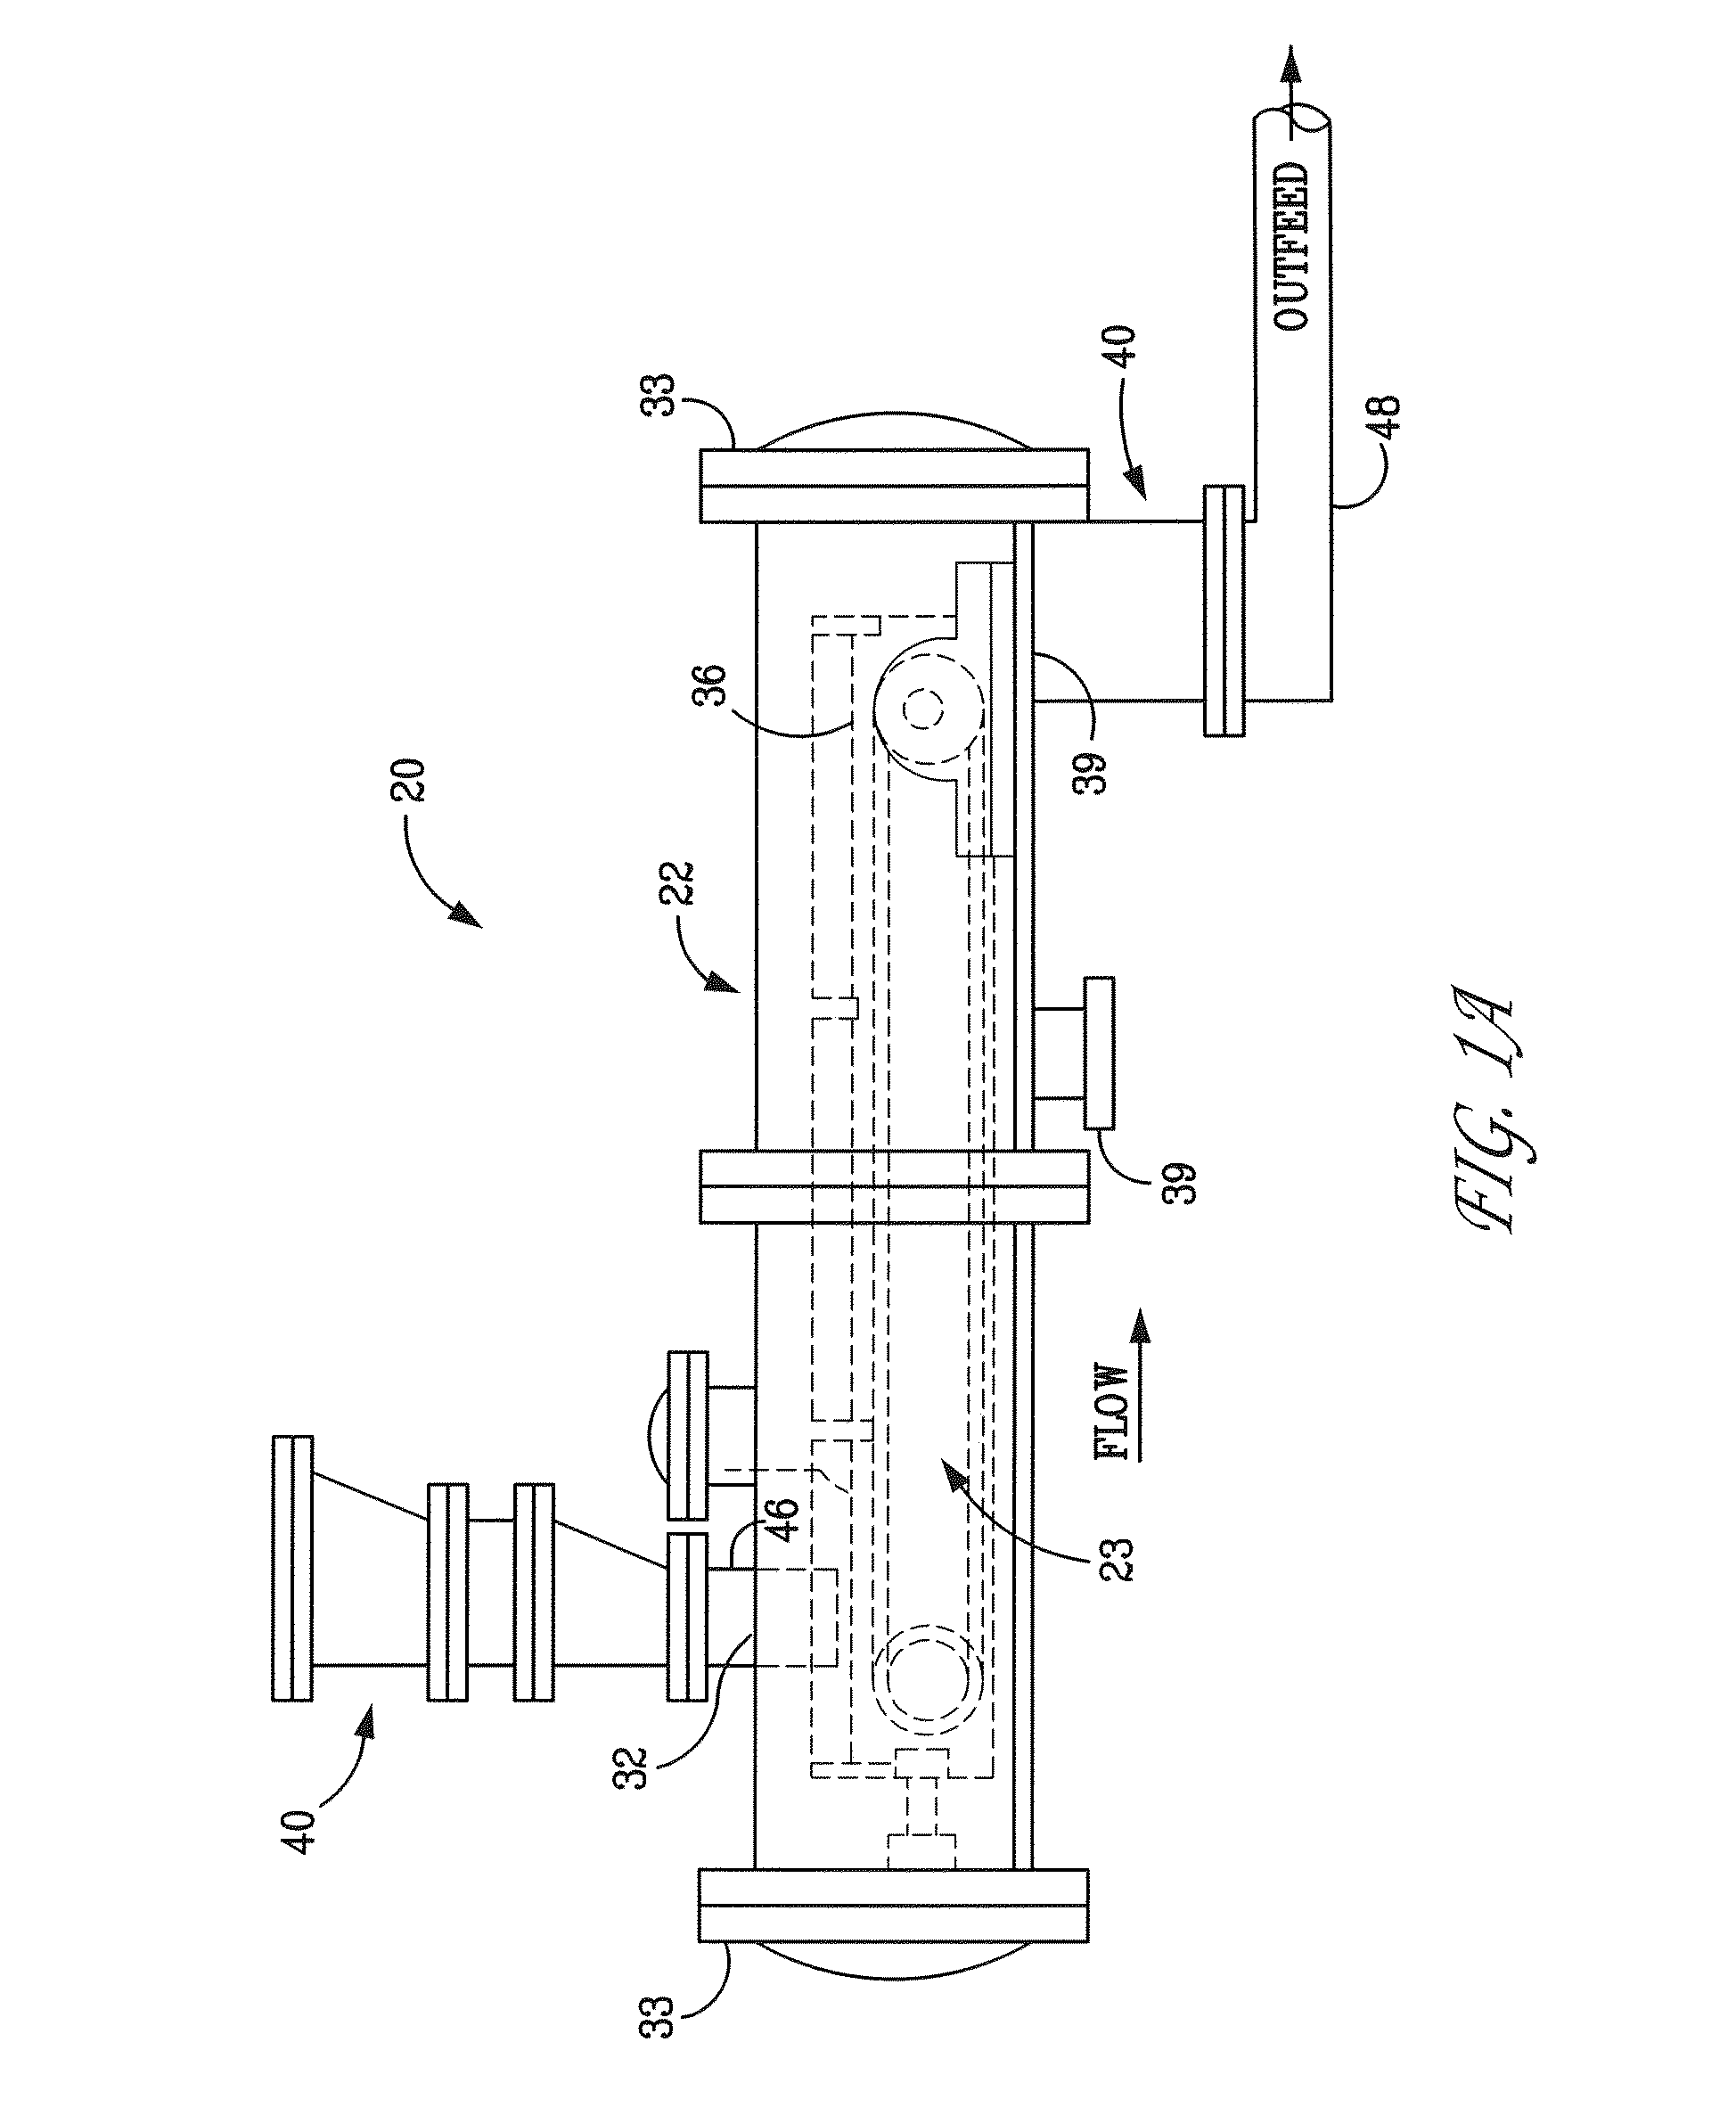 Microwave-based conveying devices and processing of carbonaceous materials